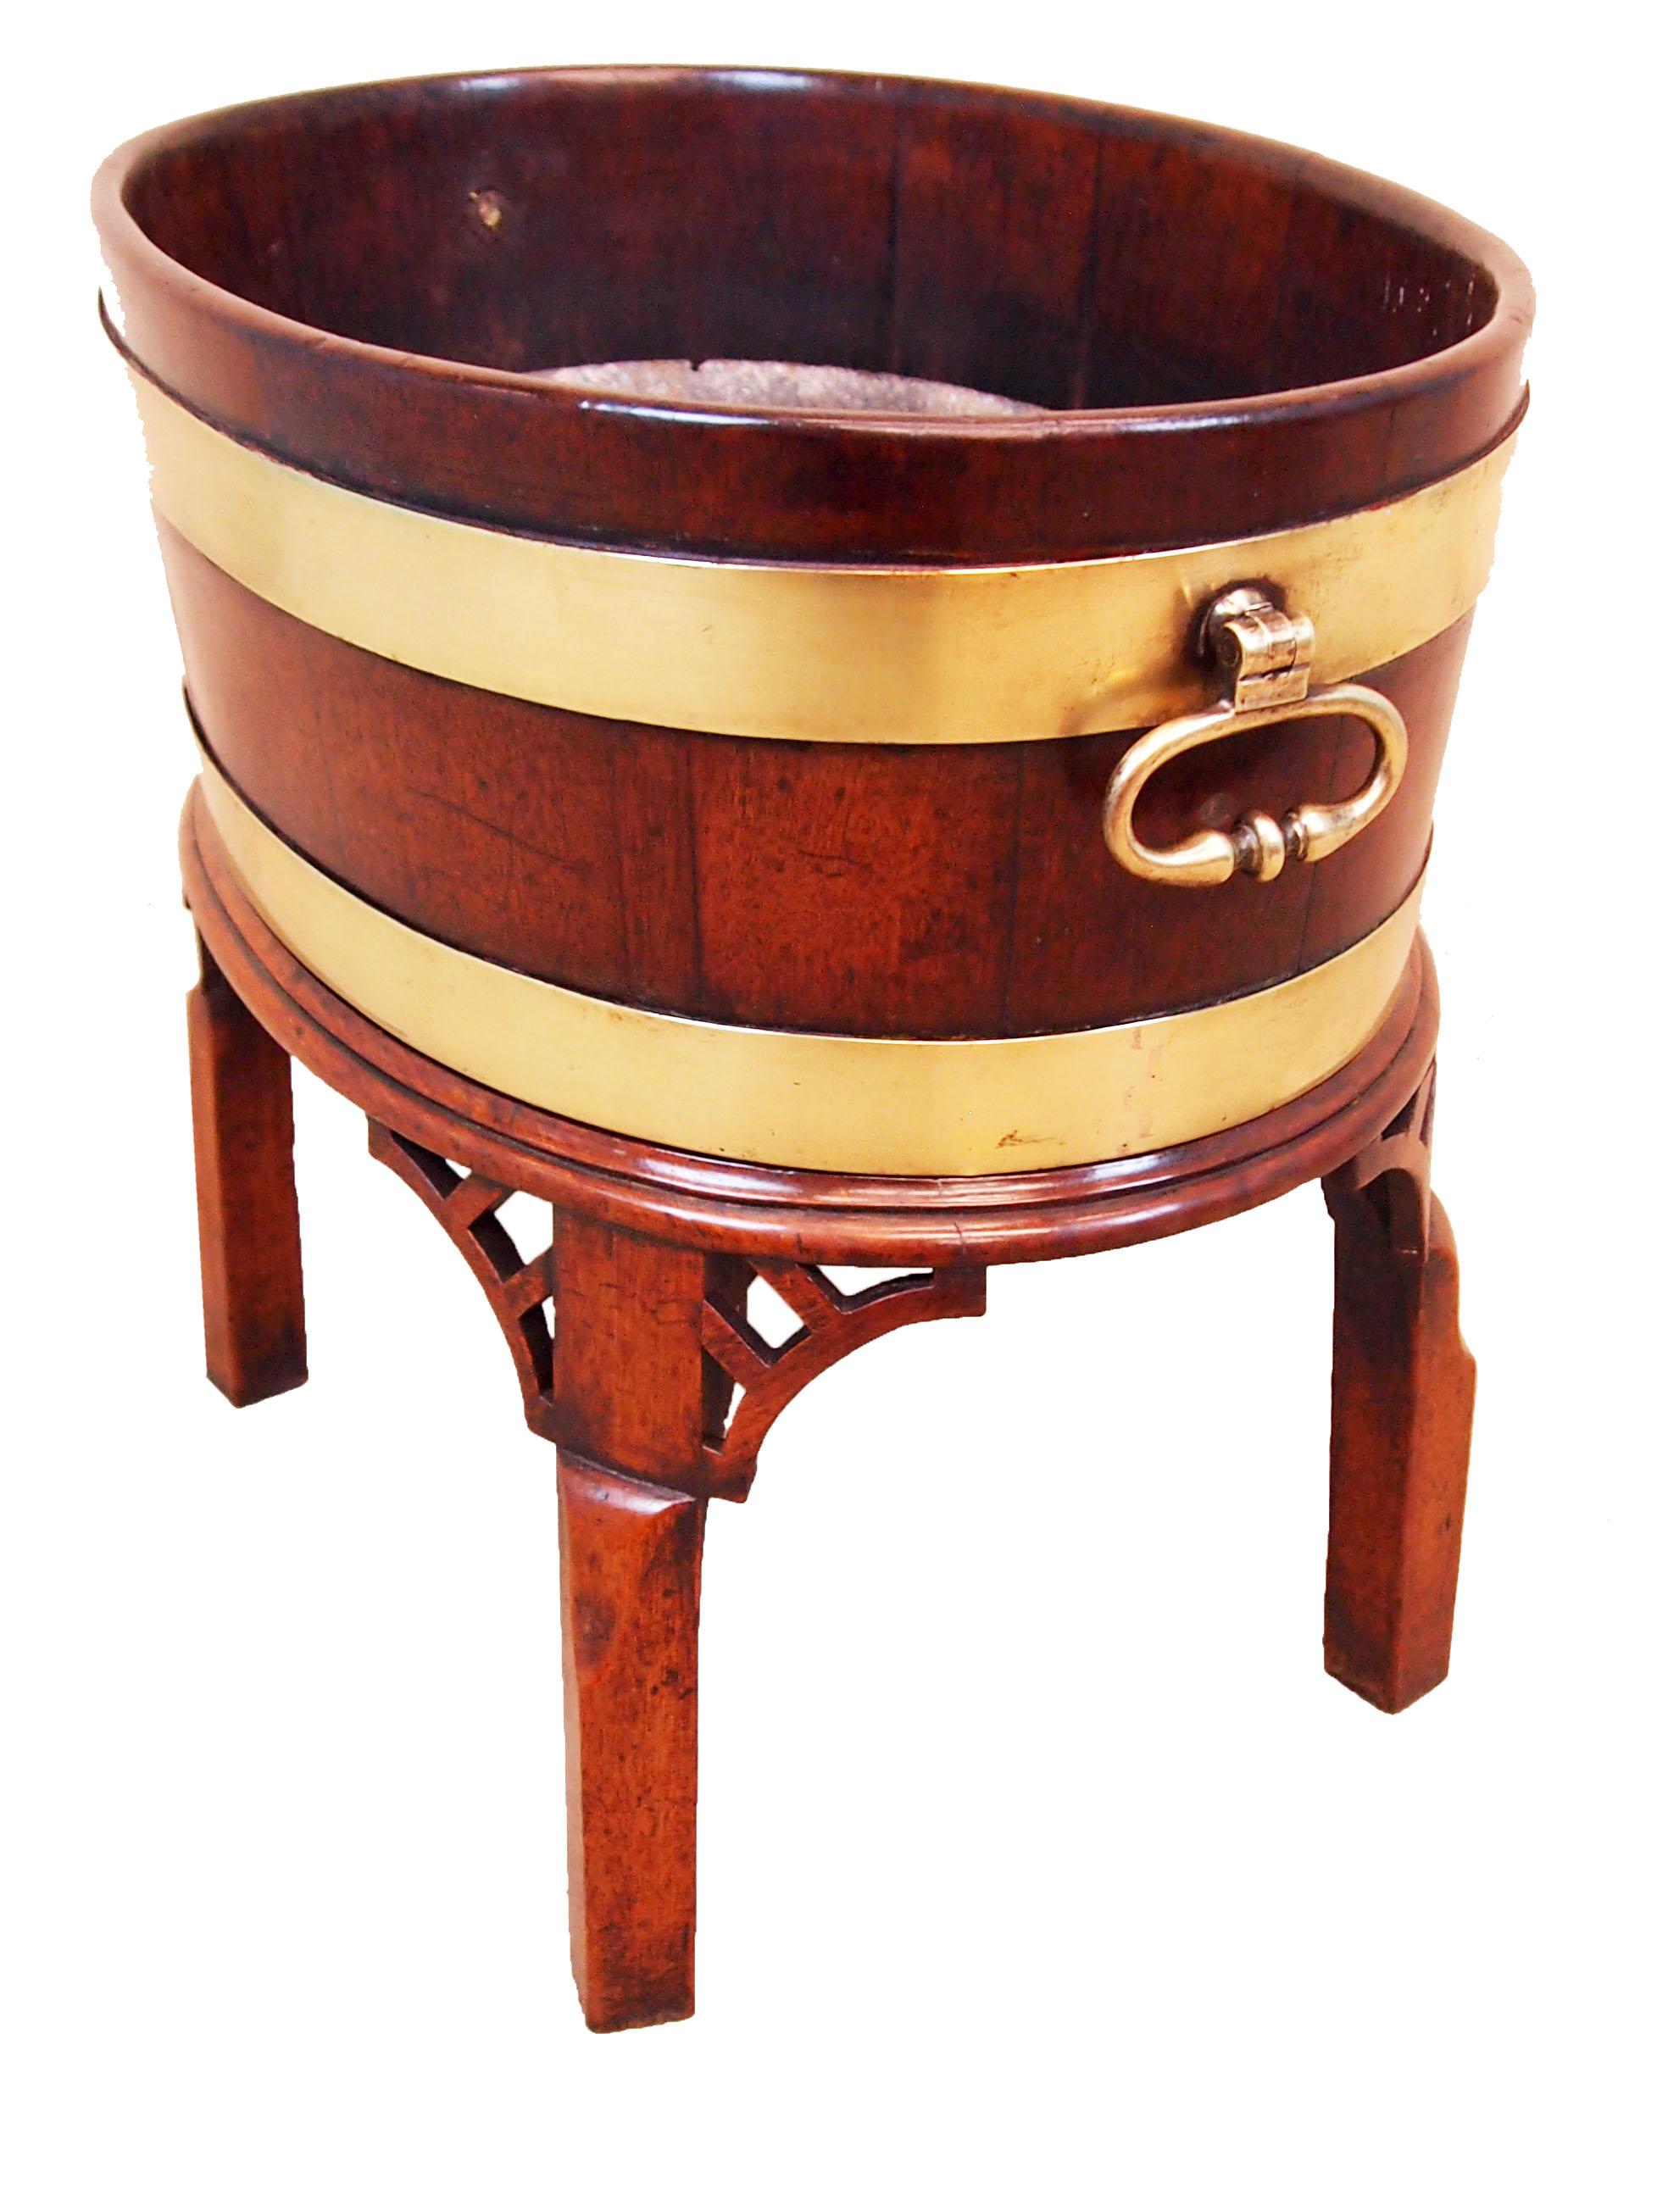 A delightful 18th century mahogany oval open wine
Cooler having original brass bound decoration and
Original brass carrying handles housed on original
Square leg stand with pierced corner brackets

(This beautiful oval wine cooler is raised on